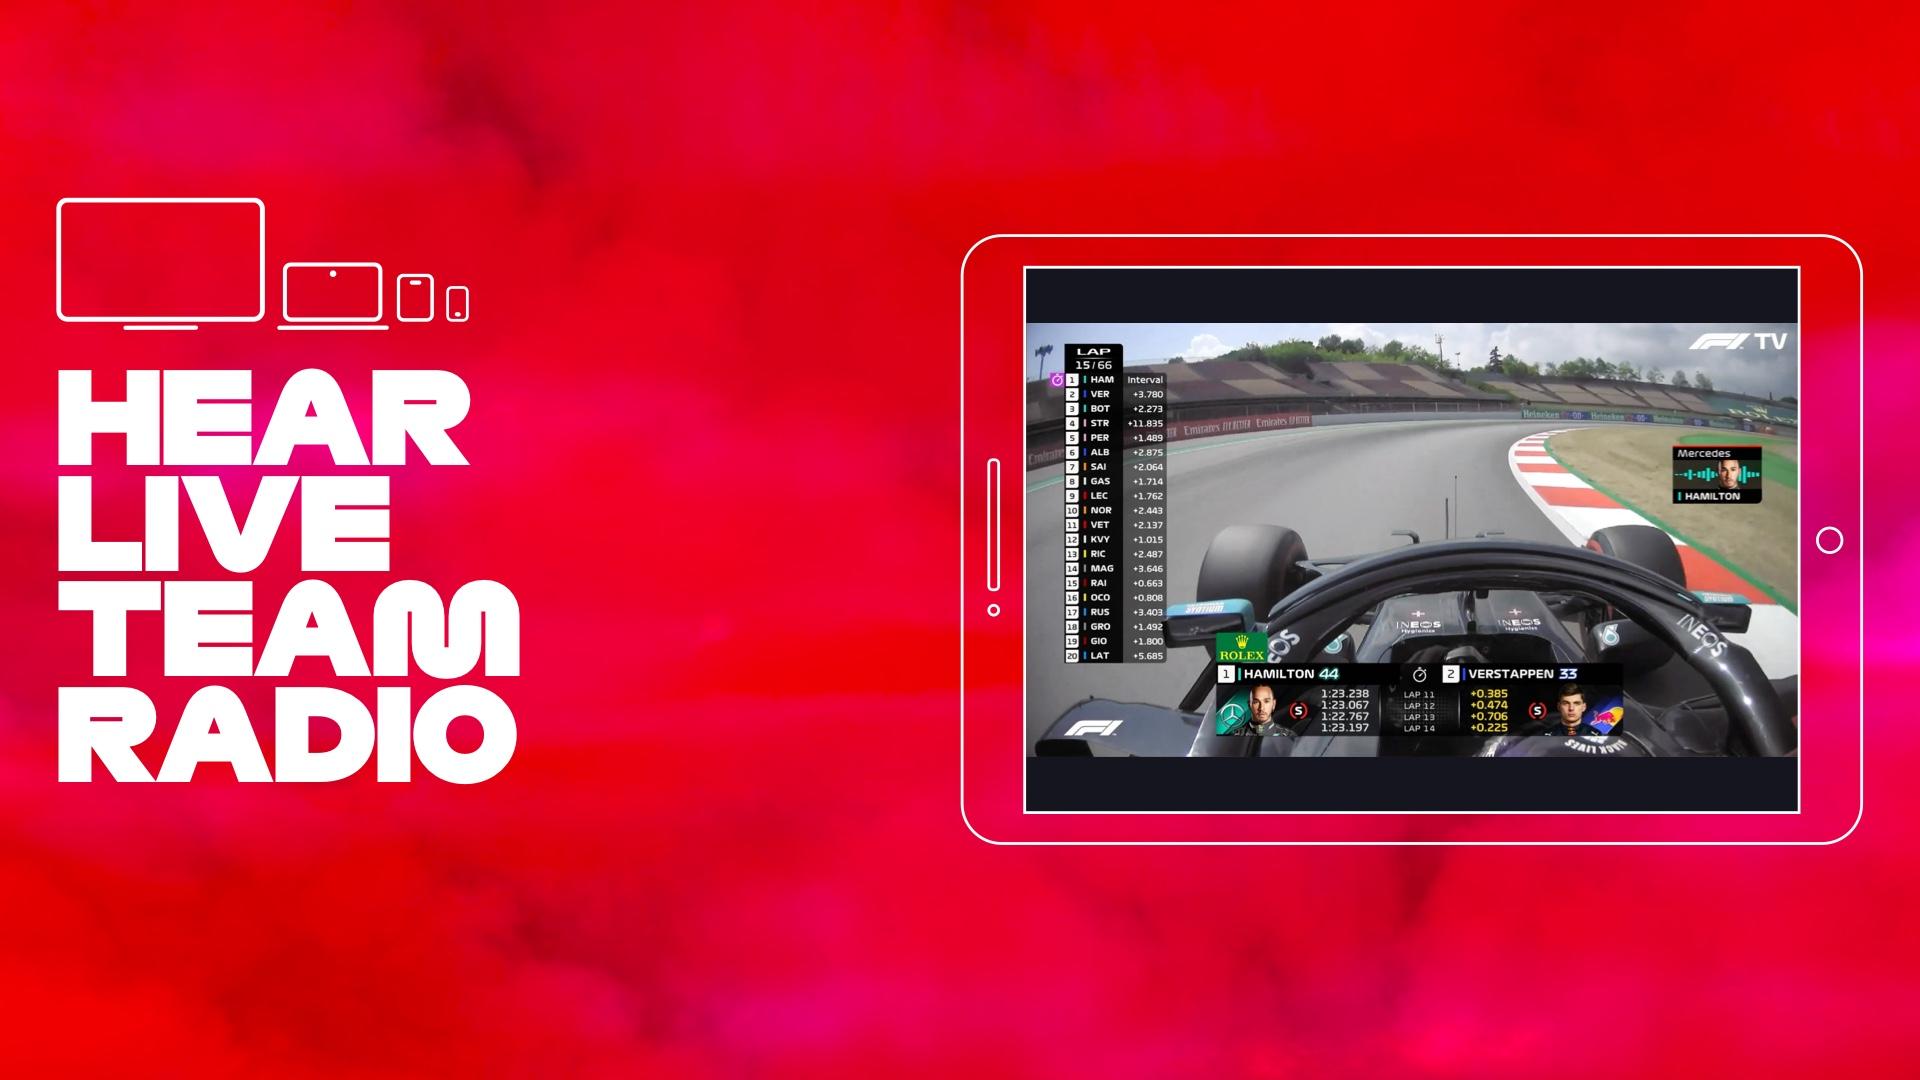 F1 TV for Android - APK Download